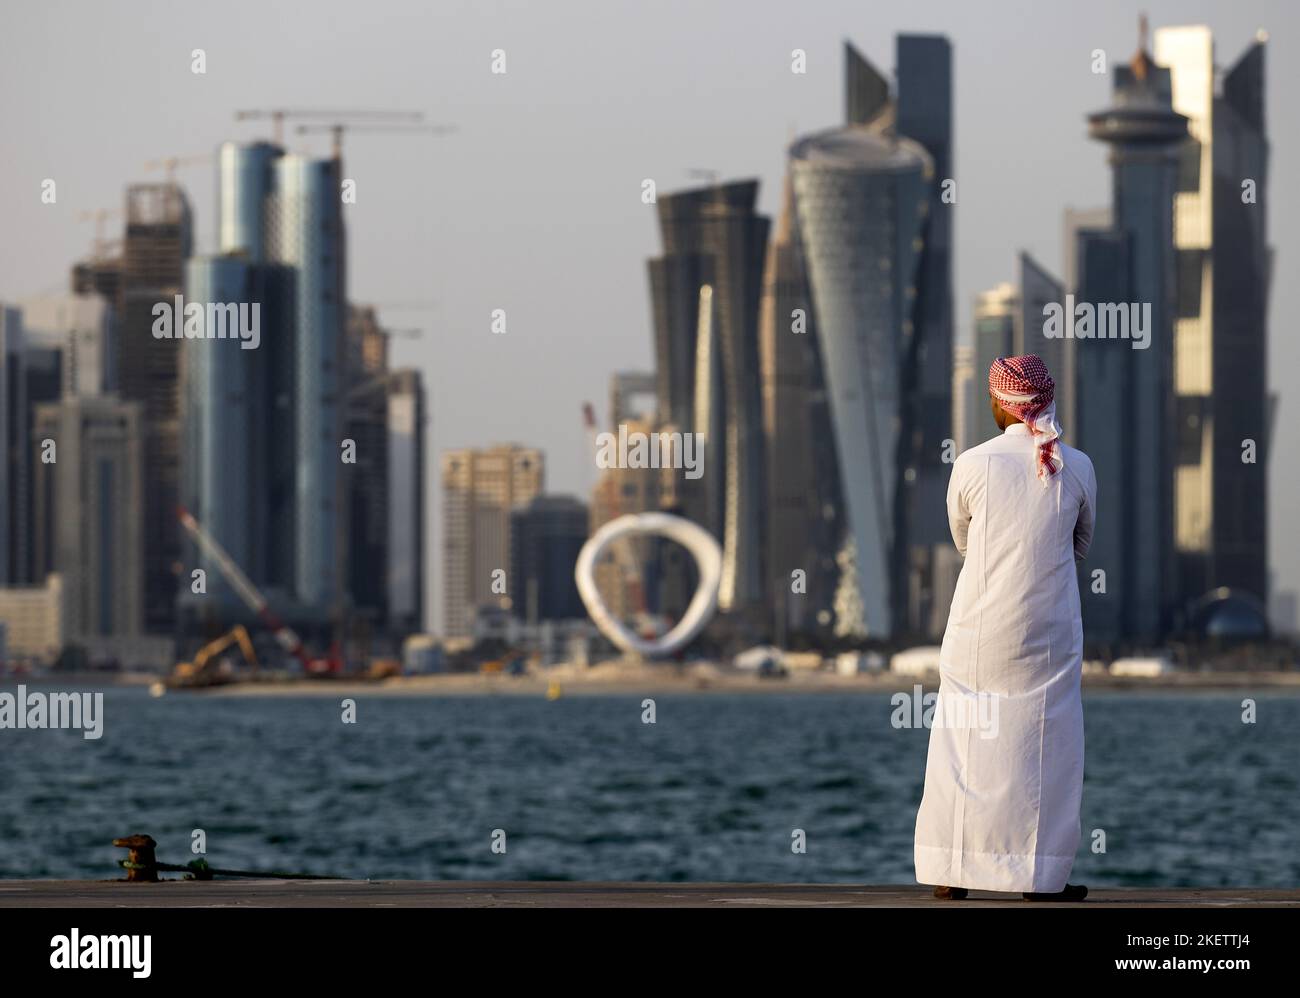 DOHA - Qatar, 2022-11-14 14:02:07 DOHA - A Qatari with West Bay in Doha in the background. Qatar is awaiting the FIFA World Cup. ANP KOEN VAN WEEL netherlands out - belgium out Stock Photo